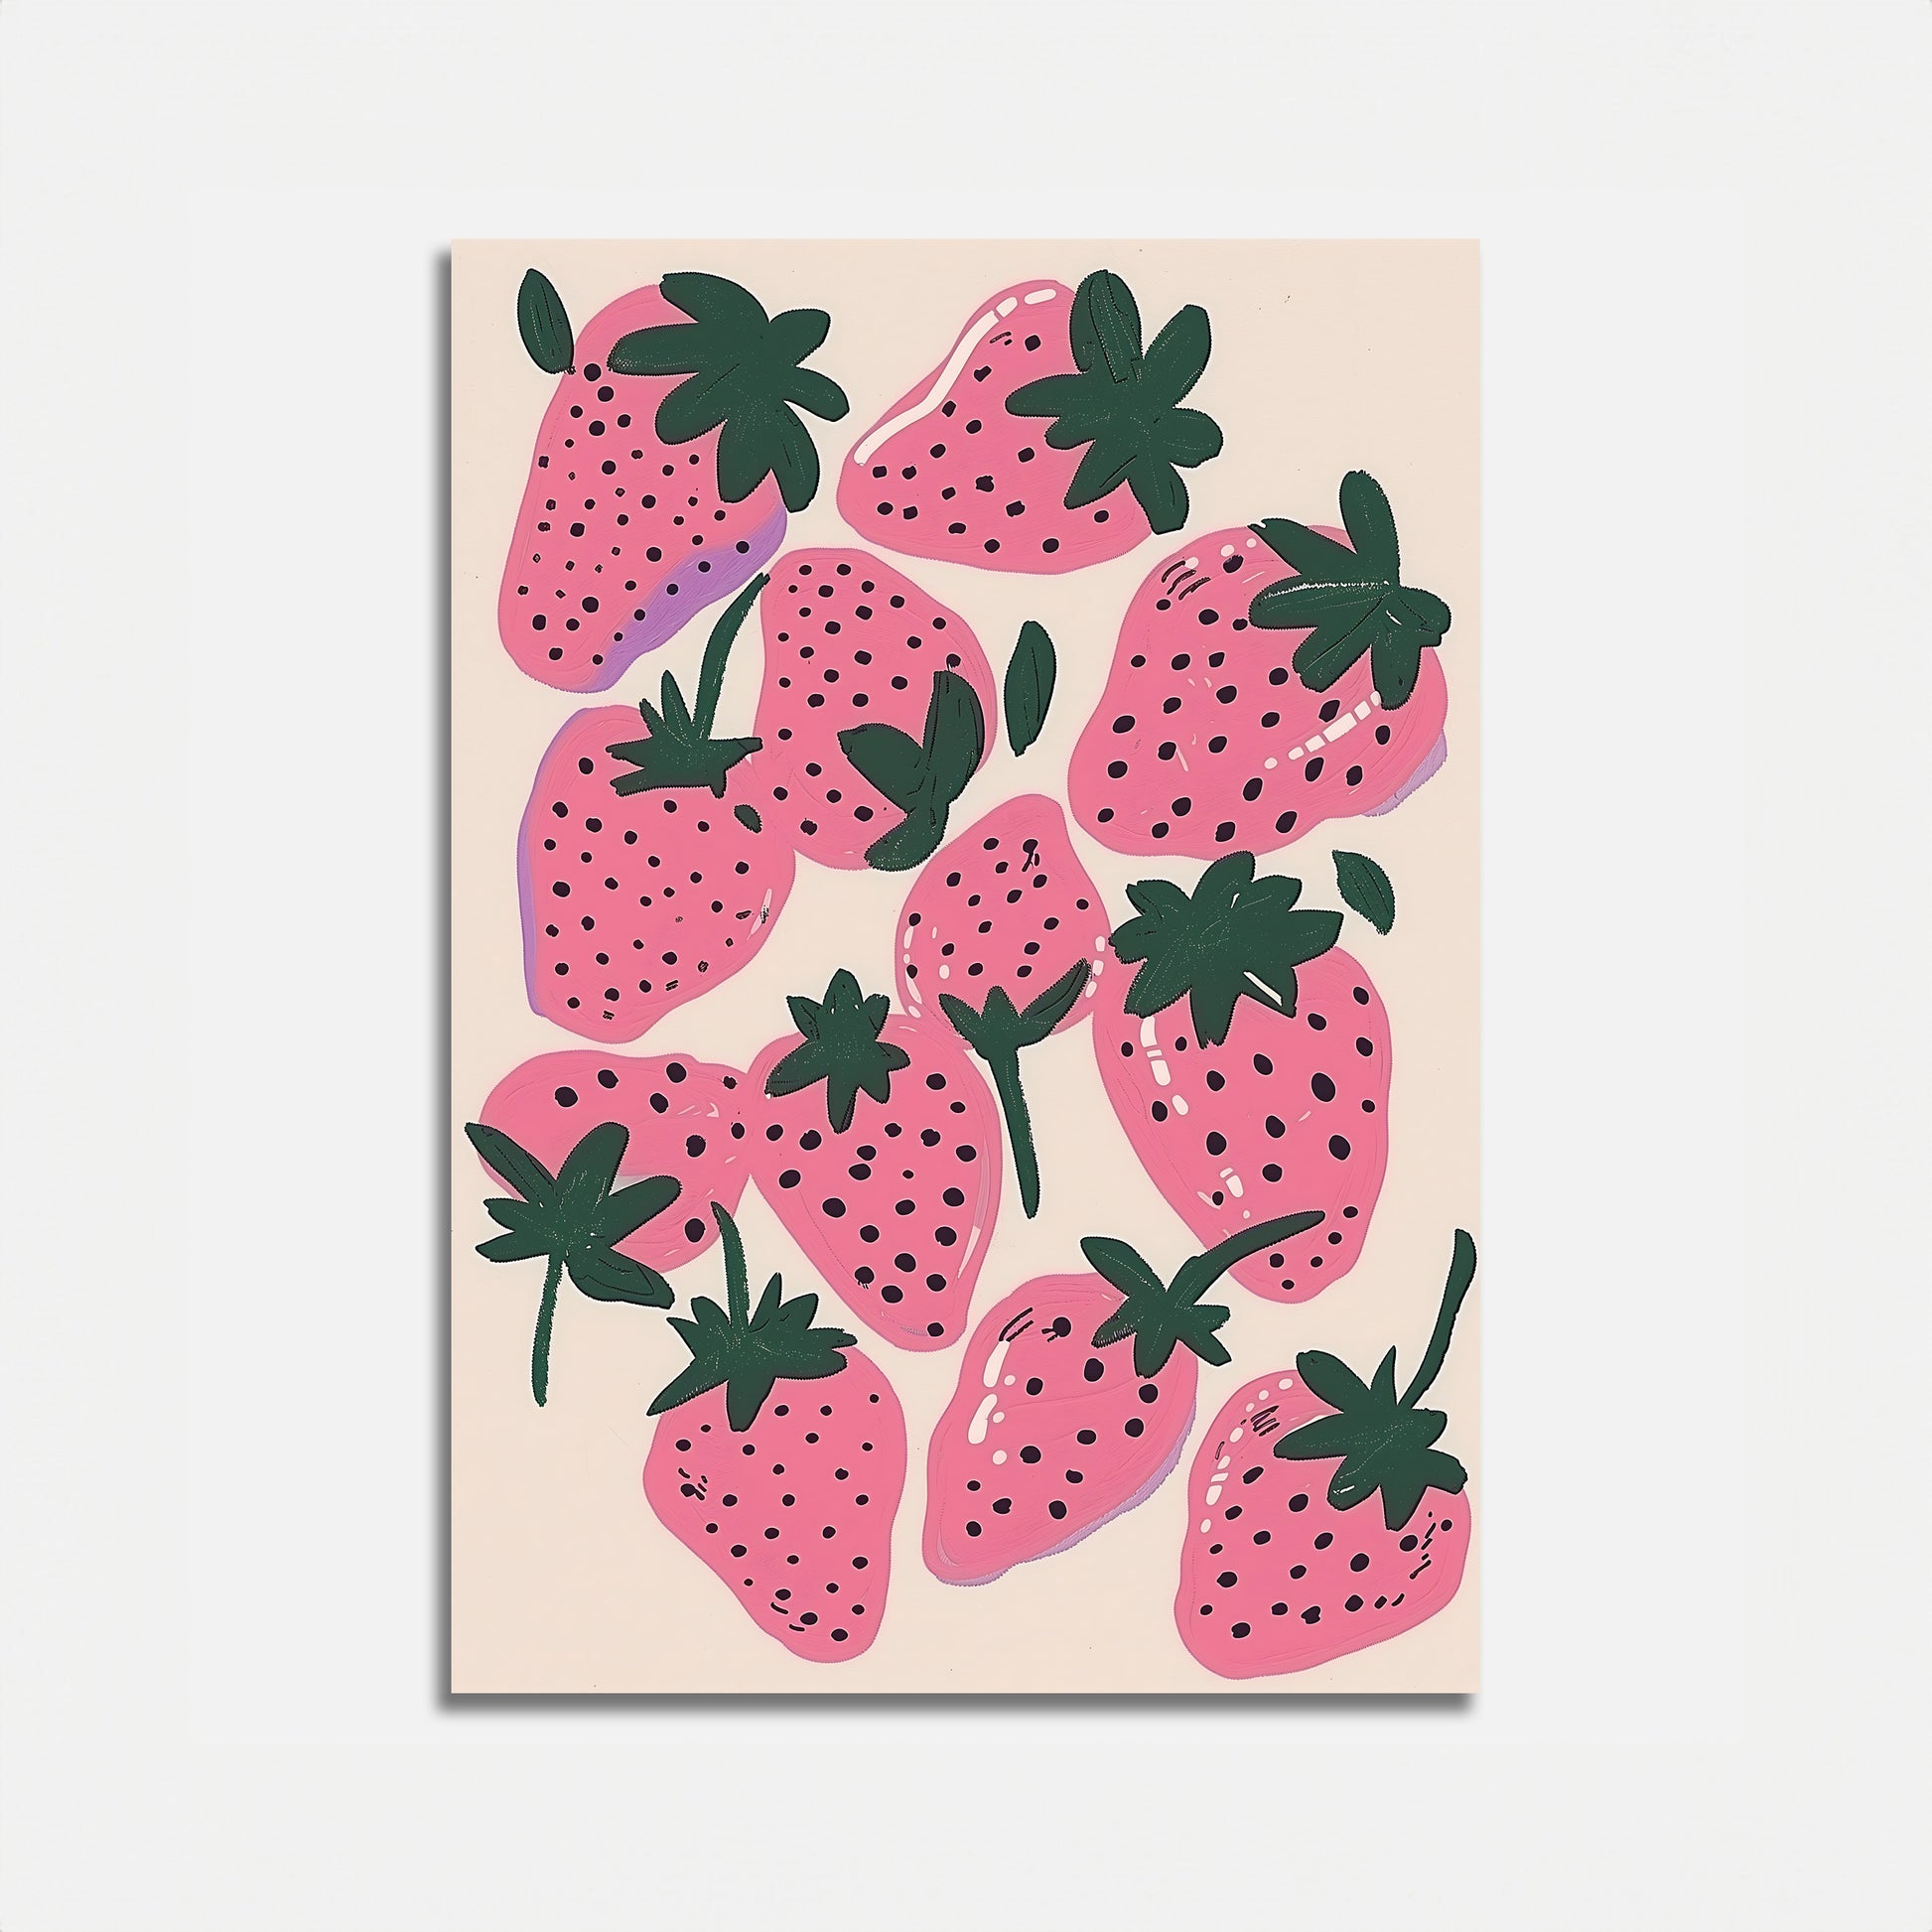 Illustration of pink strawberries with black seeds on a light background.